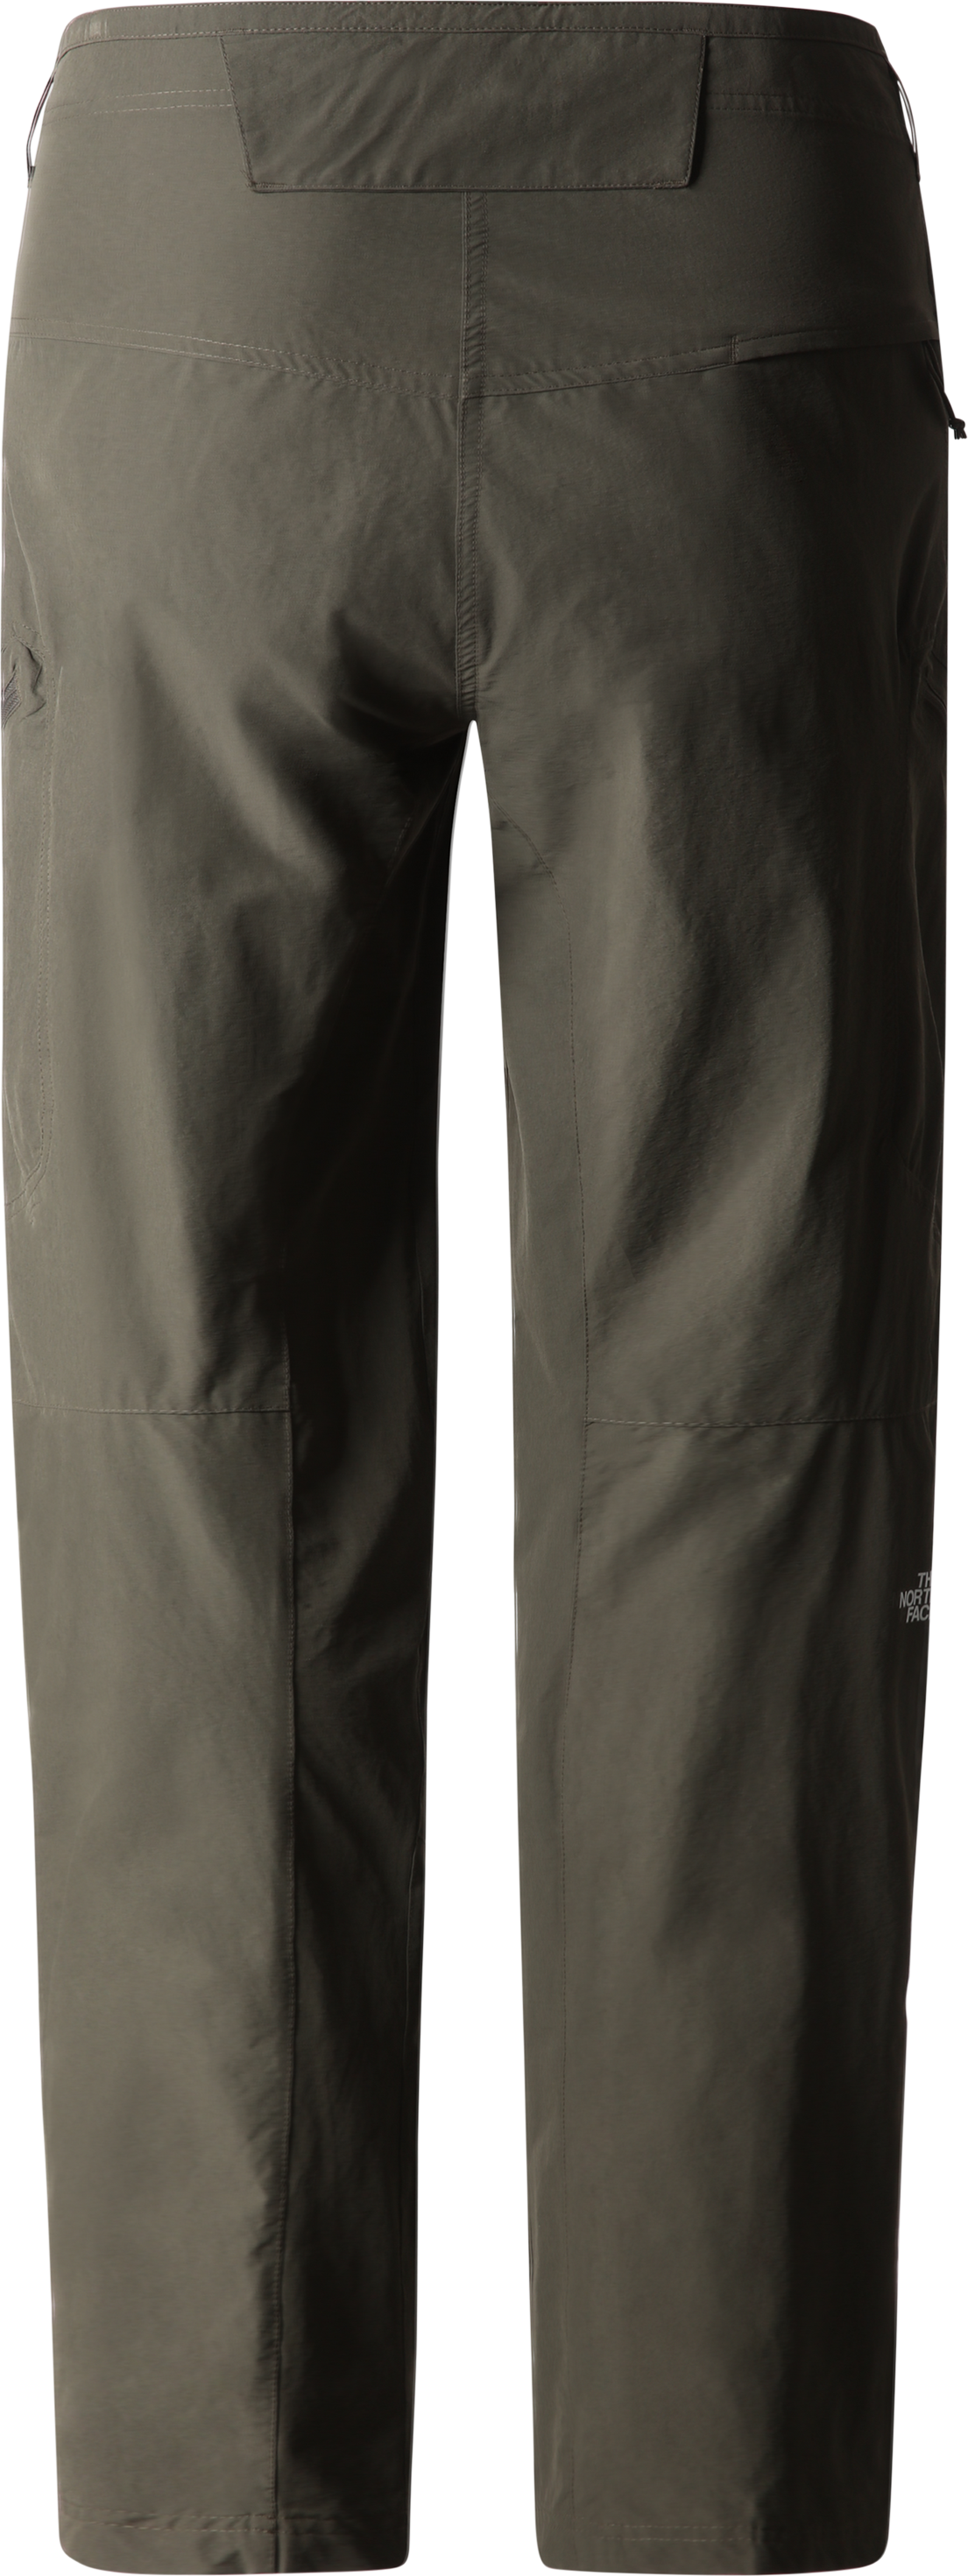 Chilly Softshell Pant Women | True Black | Hiking trousers | Trousers |  Shorts | Activities | Activities | Hiking | Trousers | Shorts | Bottoms |  Hiking | Softshell trousers | Women | Trousers | Haglöfs